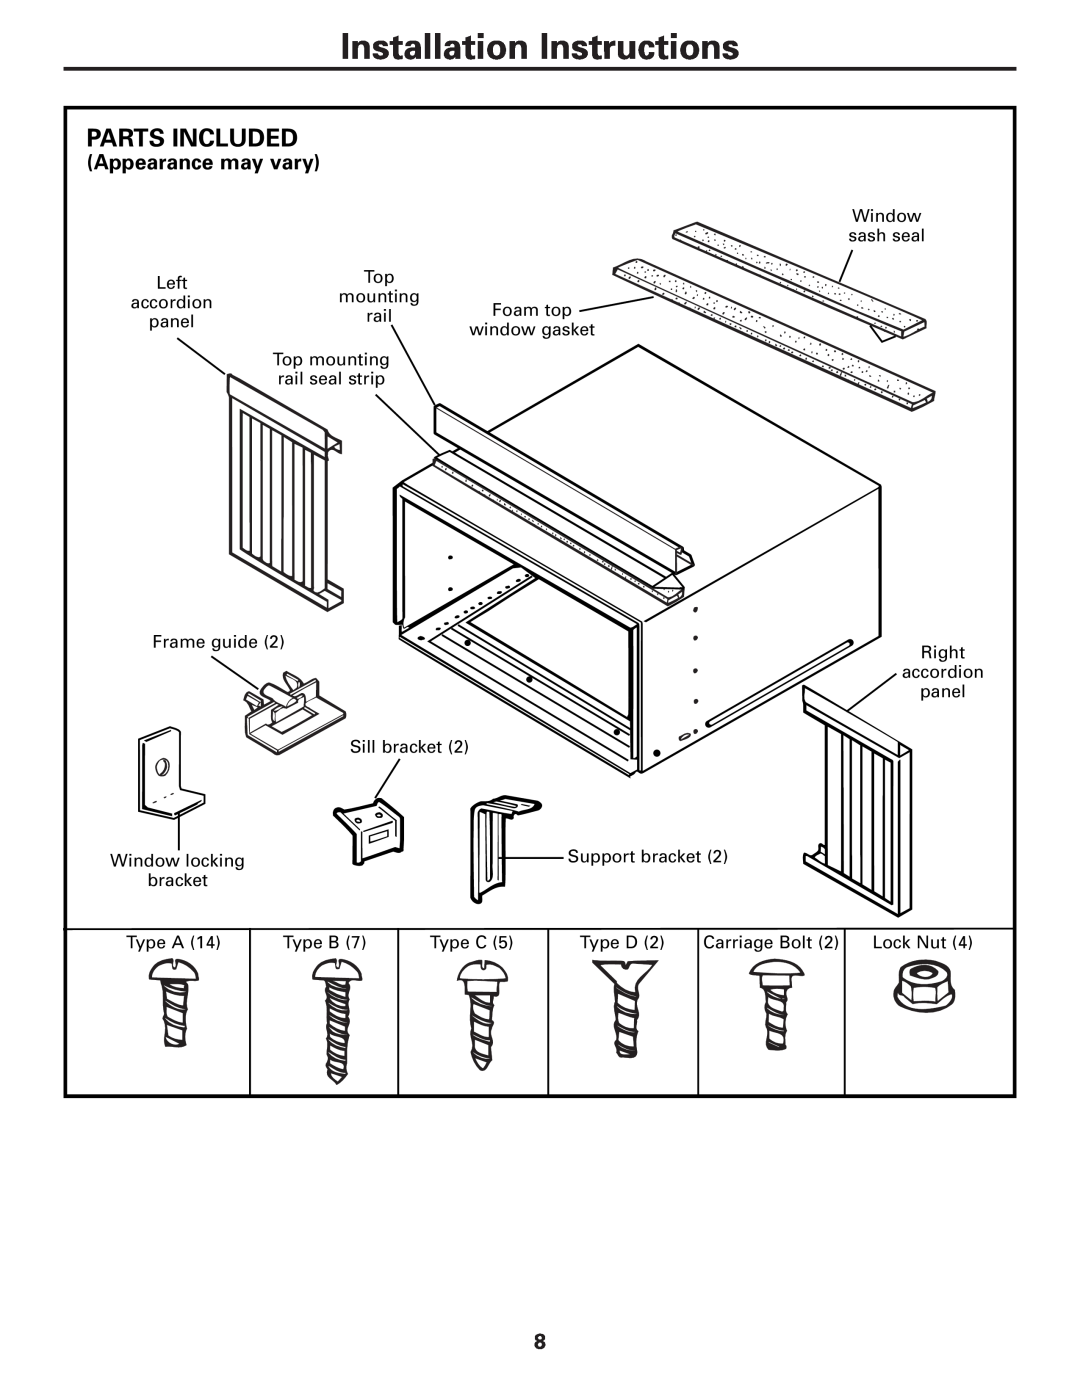 GE AGM24 operating instructions Installation Instructions, Parts Included, Appearance may vary 